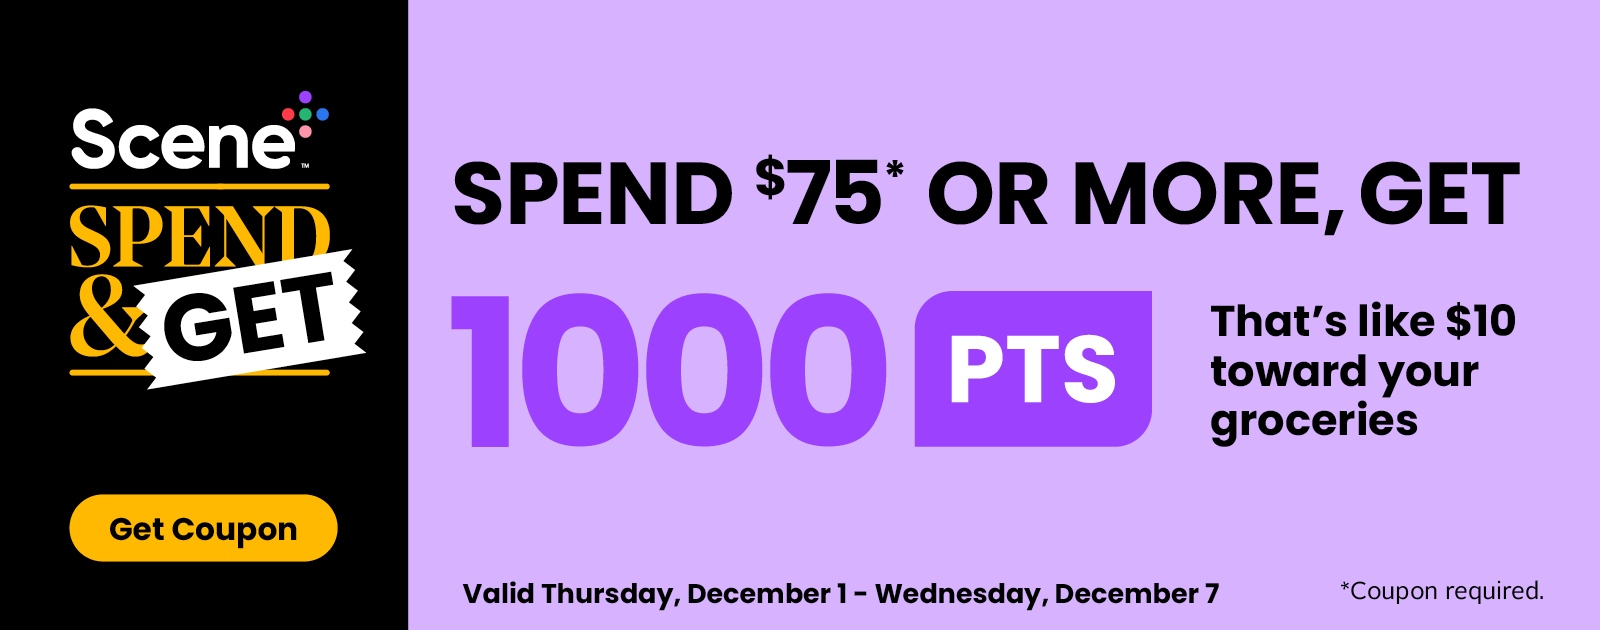 Text Reading 'Scene Plus Spend & Get. Spend $75 or more, get 1000 points. That's like $10 toward your groceries with Scene+ points. Valid from Thursday, December 1 to Wednesday, December 7, 2022. Coupon required. 'Get Coupon' by clicking on the button below.'